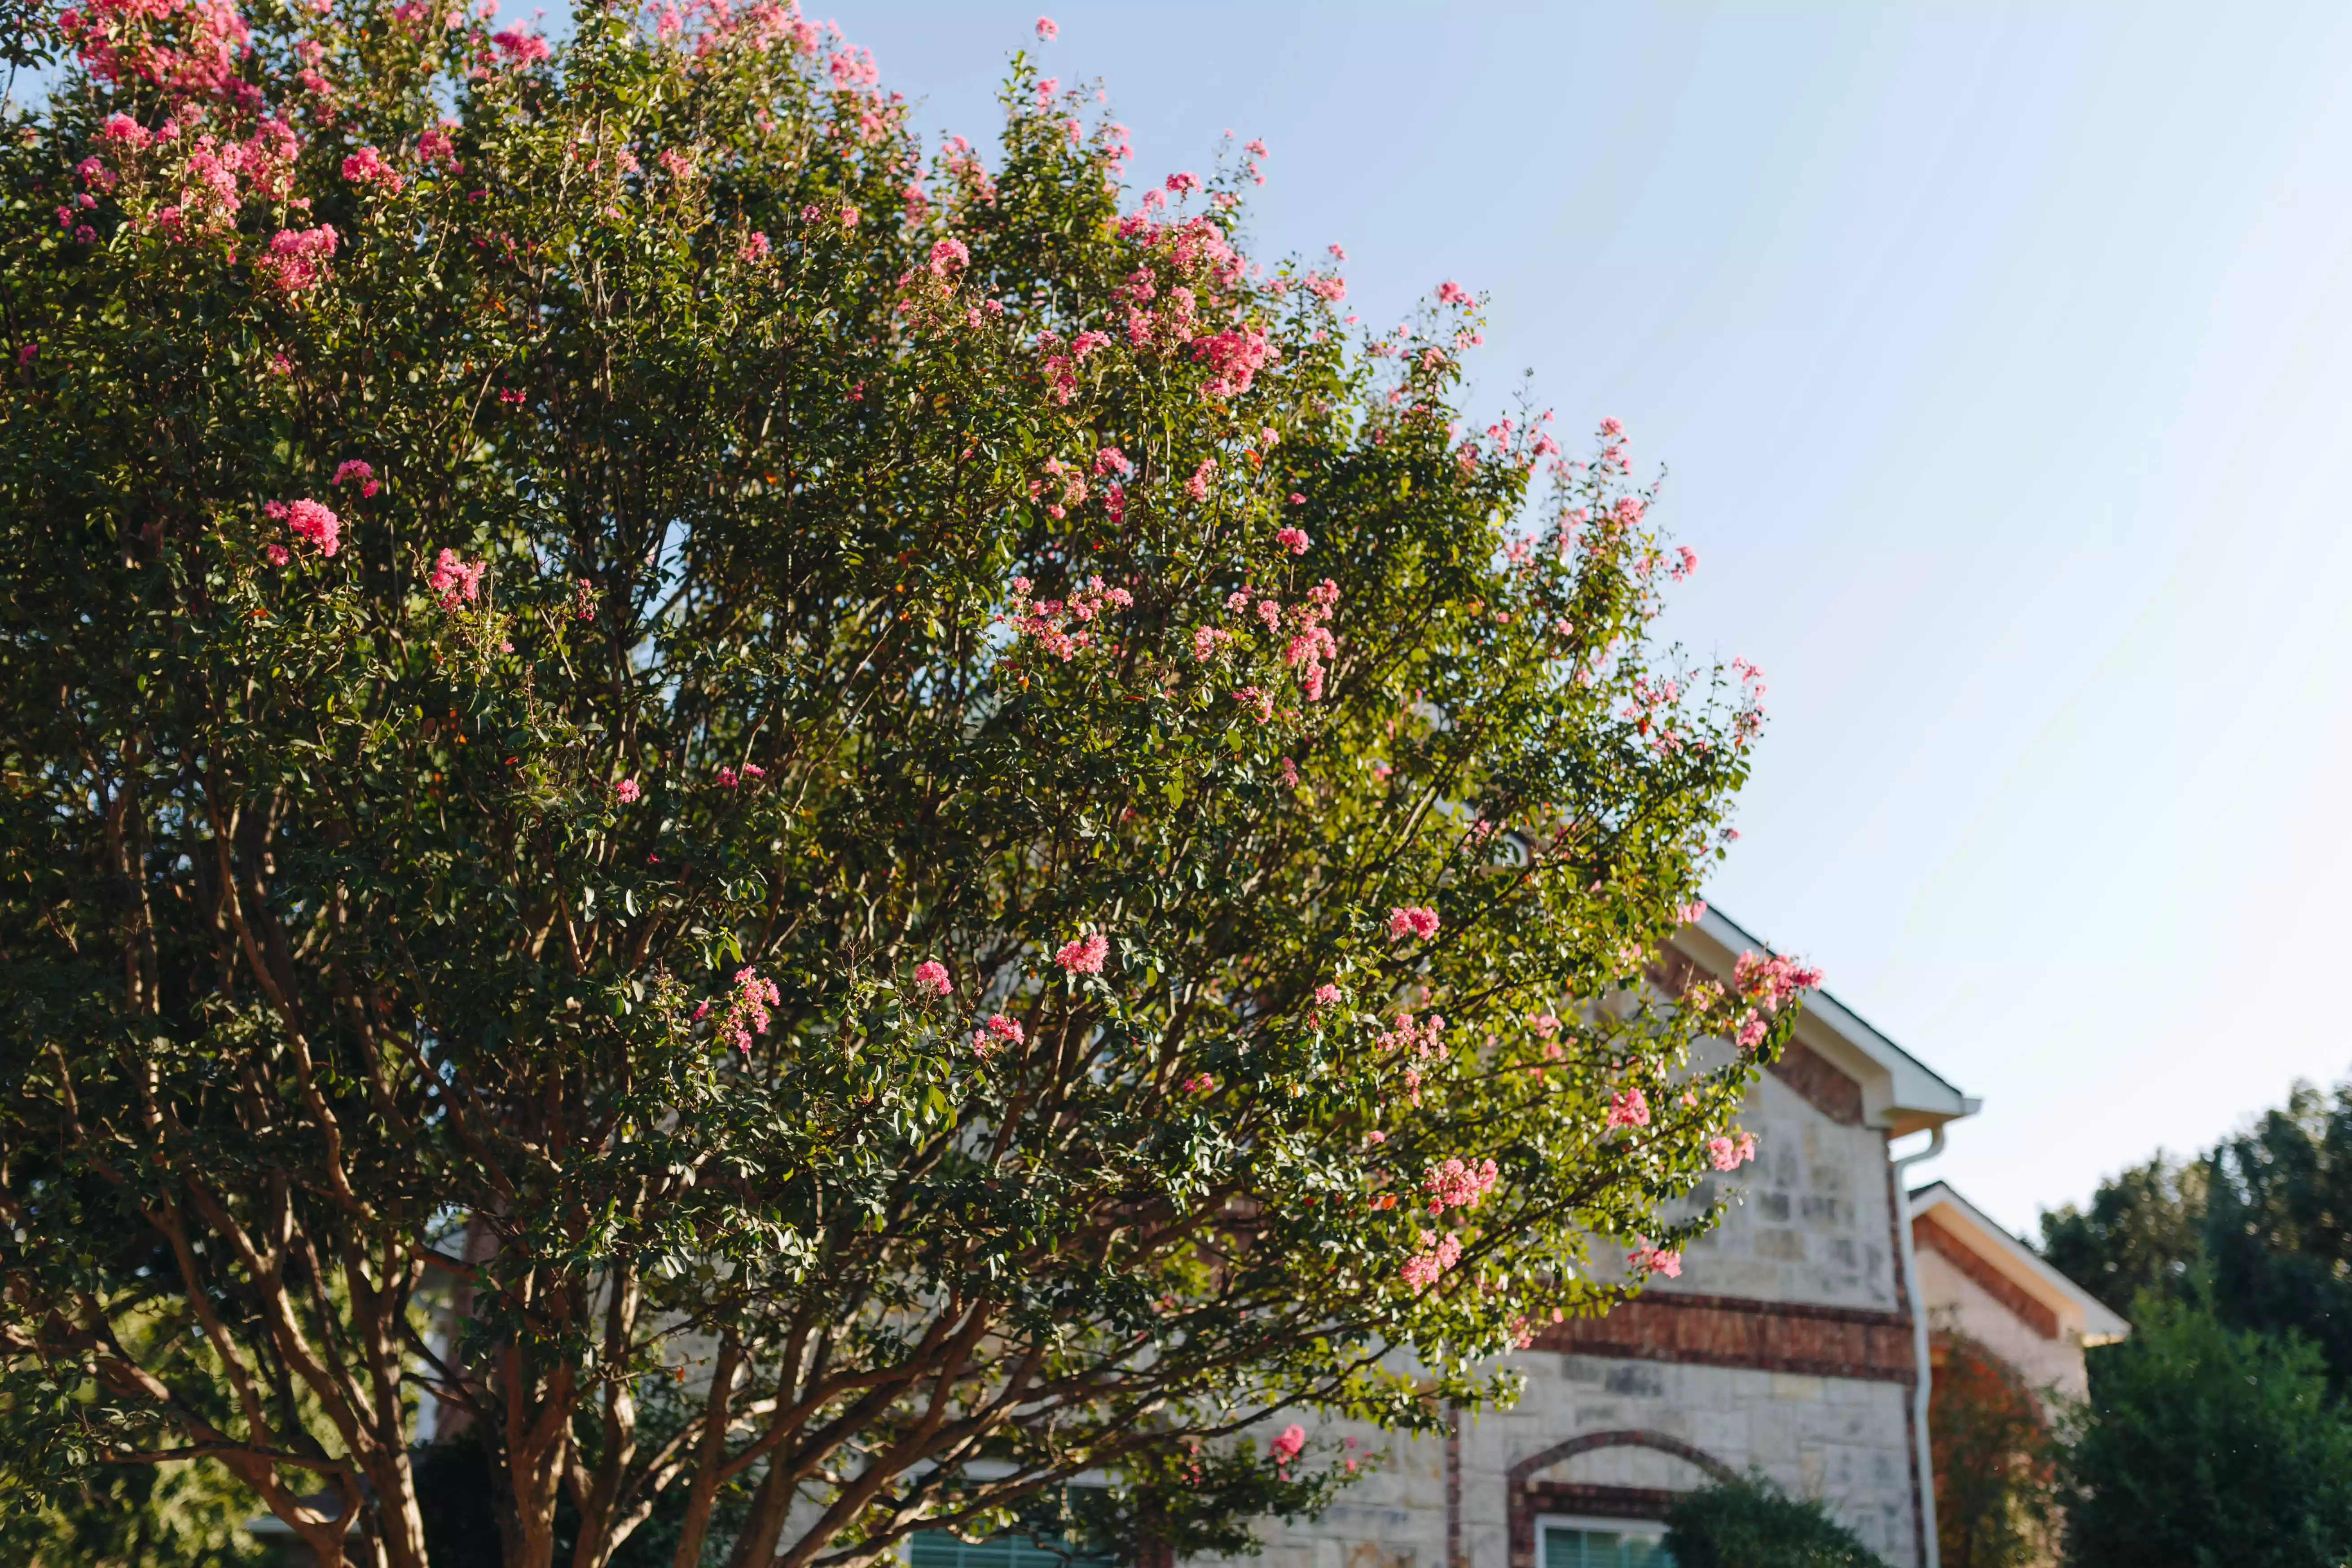 A bushy tree with pink flowers in front of a house.